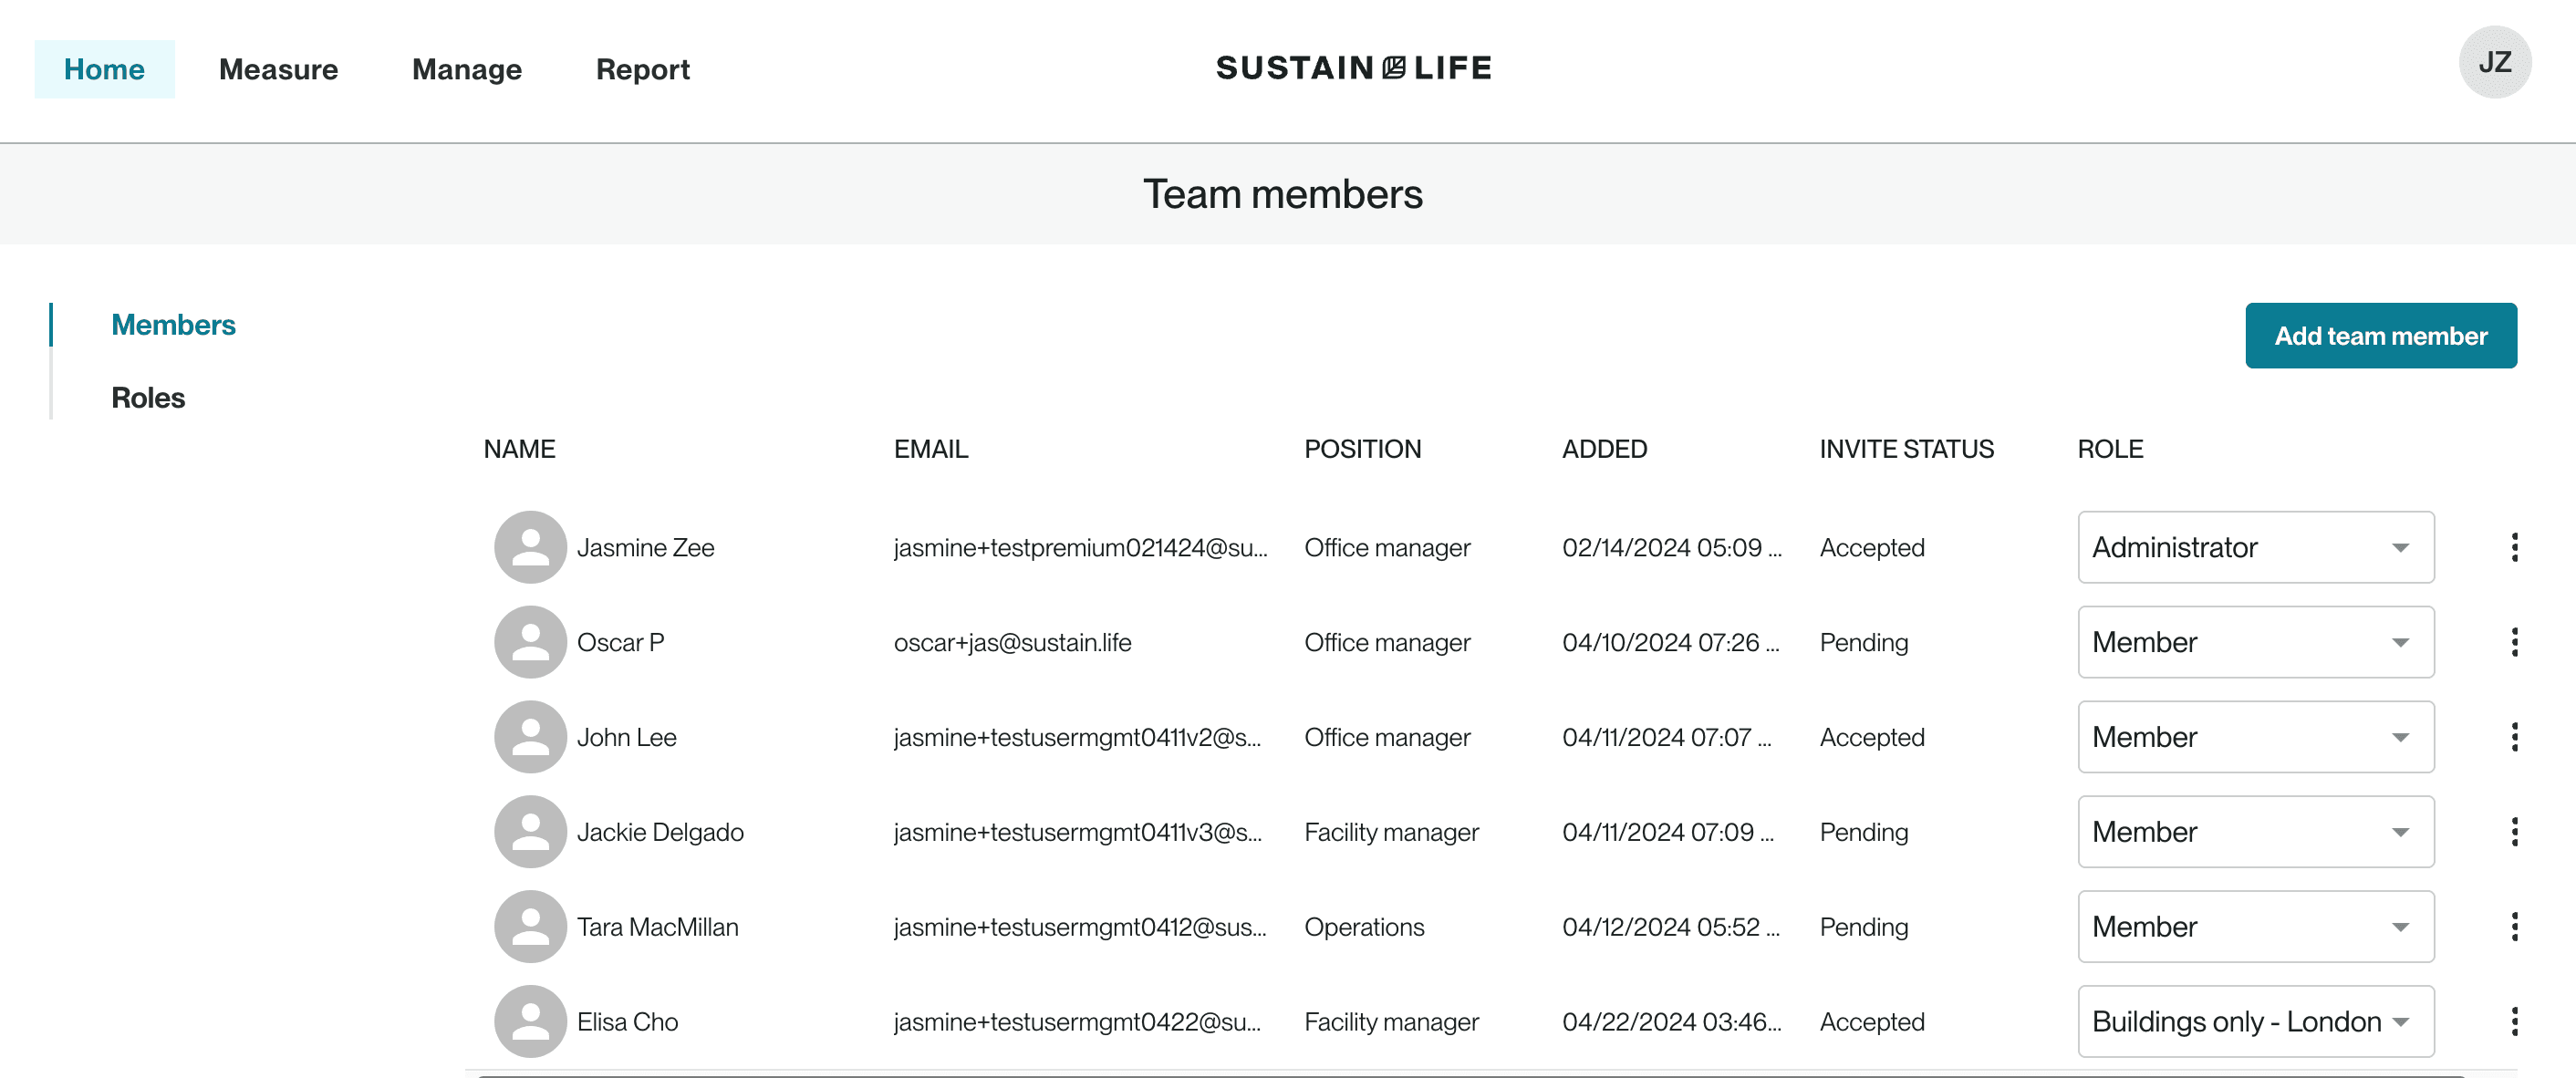 002 User permissions_Team members page.png